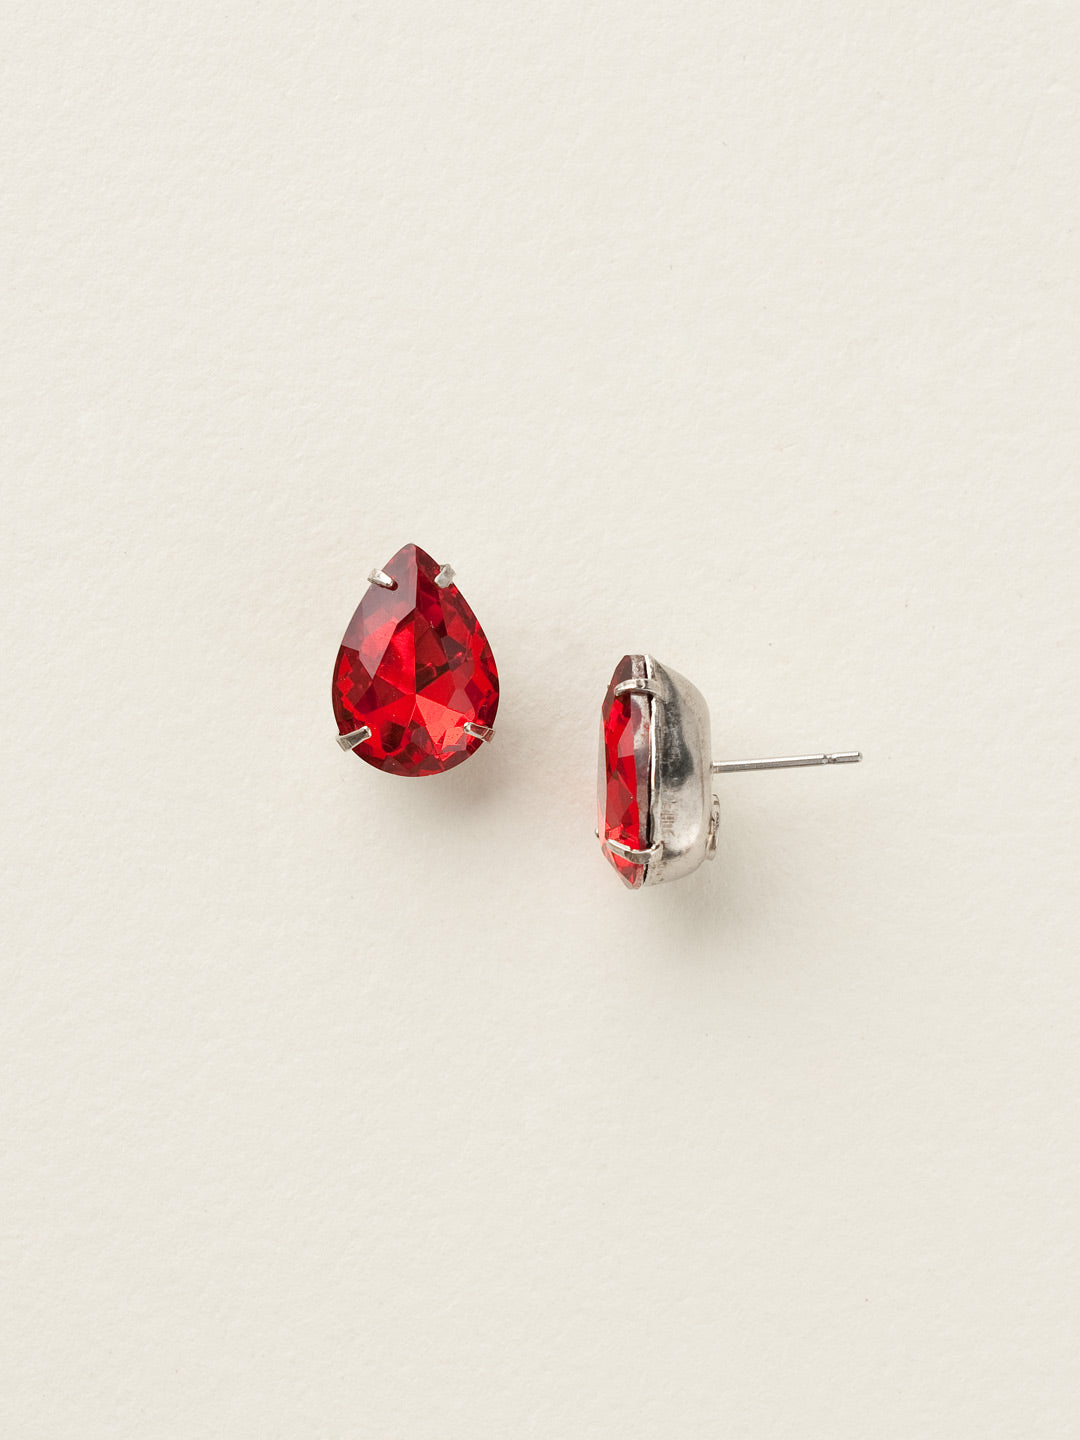 Ginnie Stud Earrings - ECR115ASGDAR - <p>A beautiful basic stud. These classic single teardrop post earrings are perfect for any occasion, especially the everyday look. A timeless treasure that will sparkle season after season. From Sorrelli's Game Day Red collection in our Antique Silver-tone finish.</p>